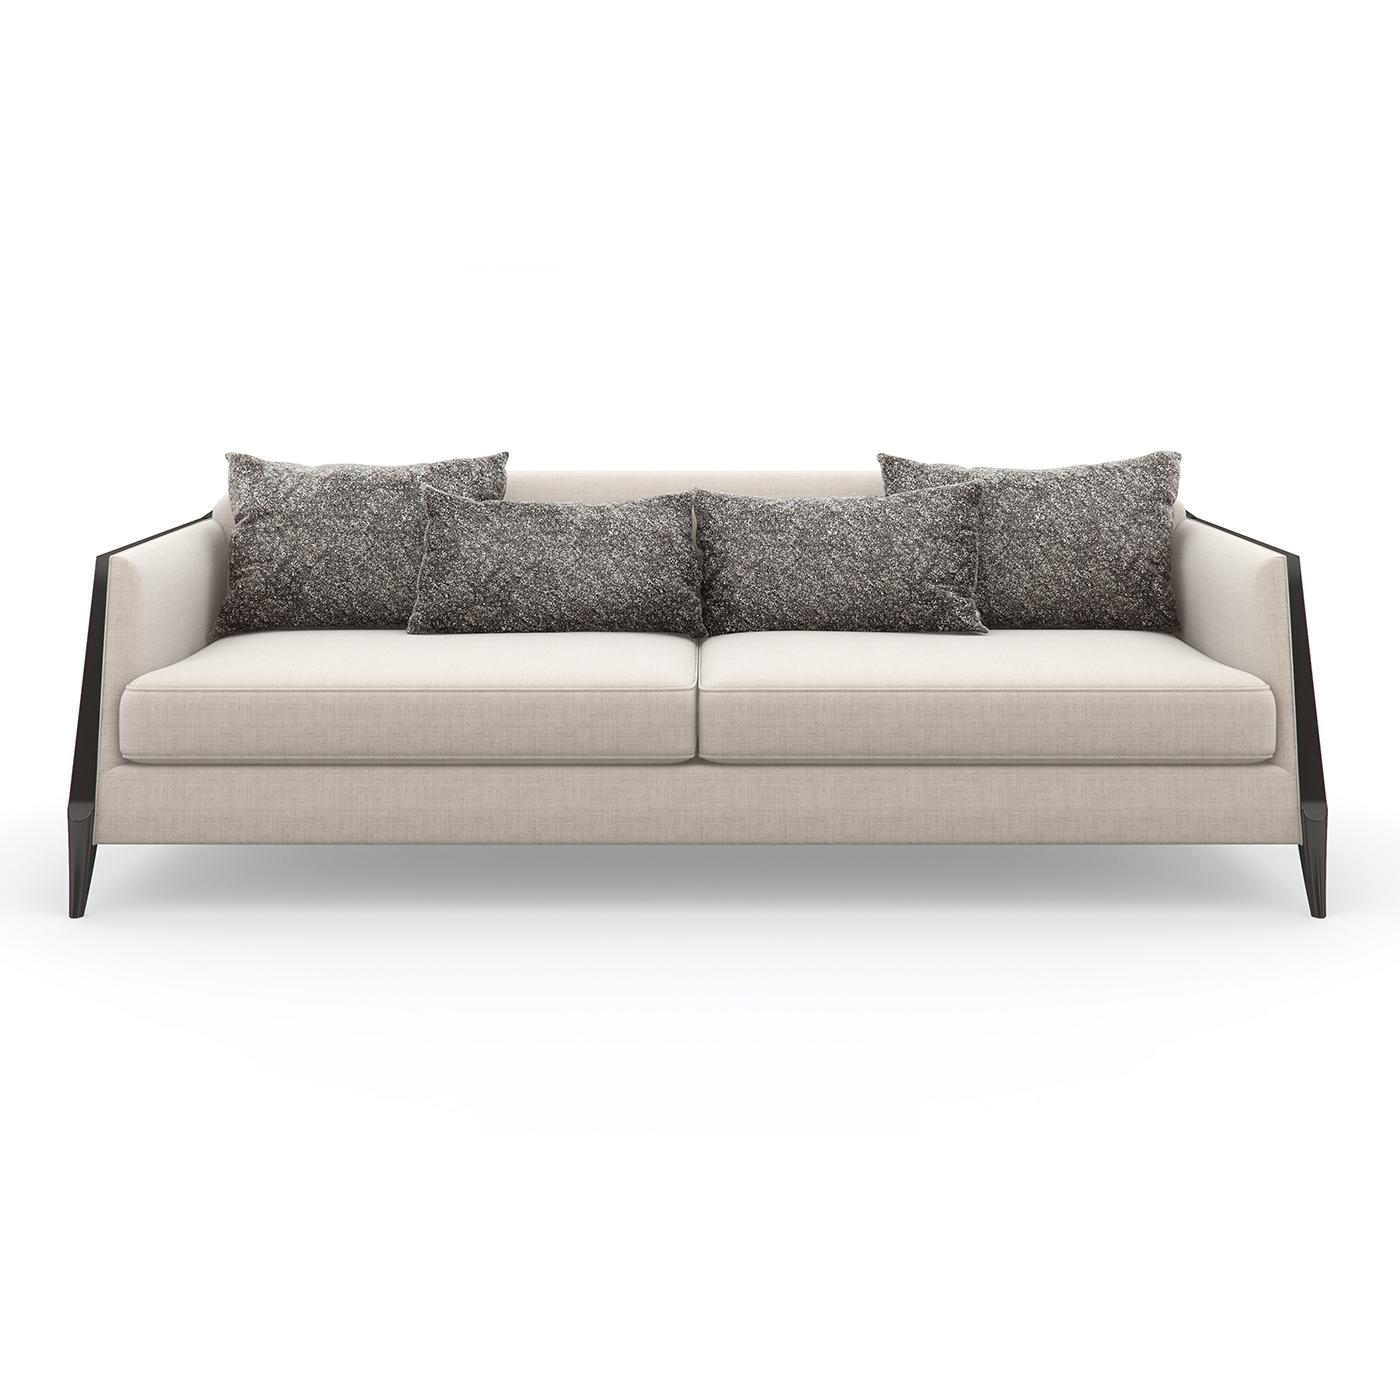 An Art Deco style sofa, Statement-making from every angle, this modern sofa features a striking silhouette, distinctly defined by continuous clean lines and a slim wood frame. Tailored to perfection in a woven linen fabric, its smooth upholstered